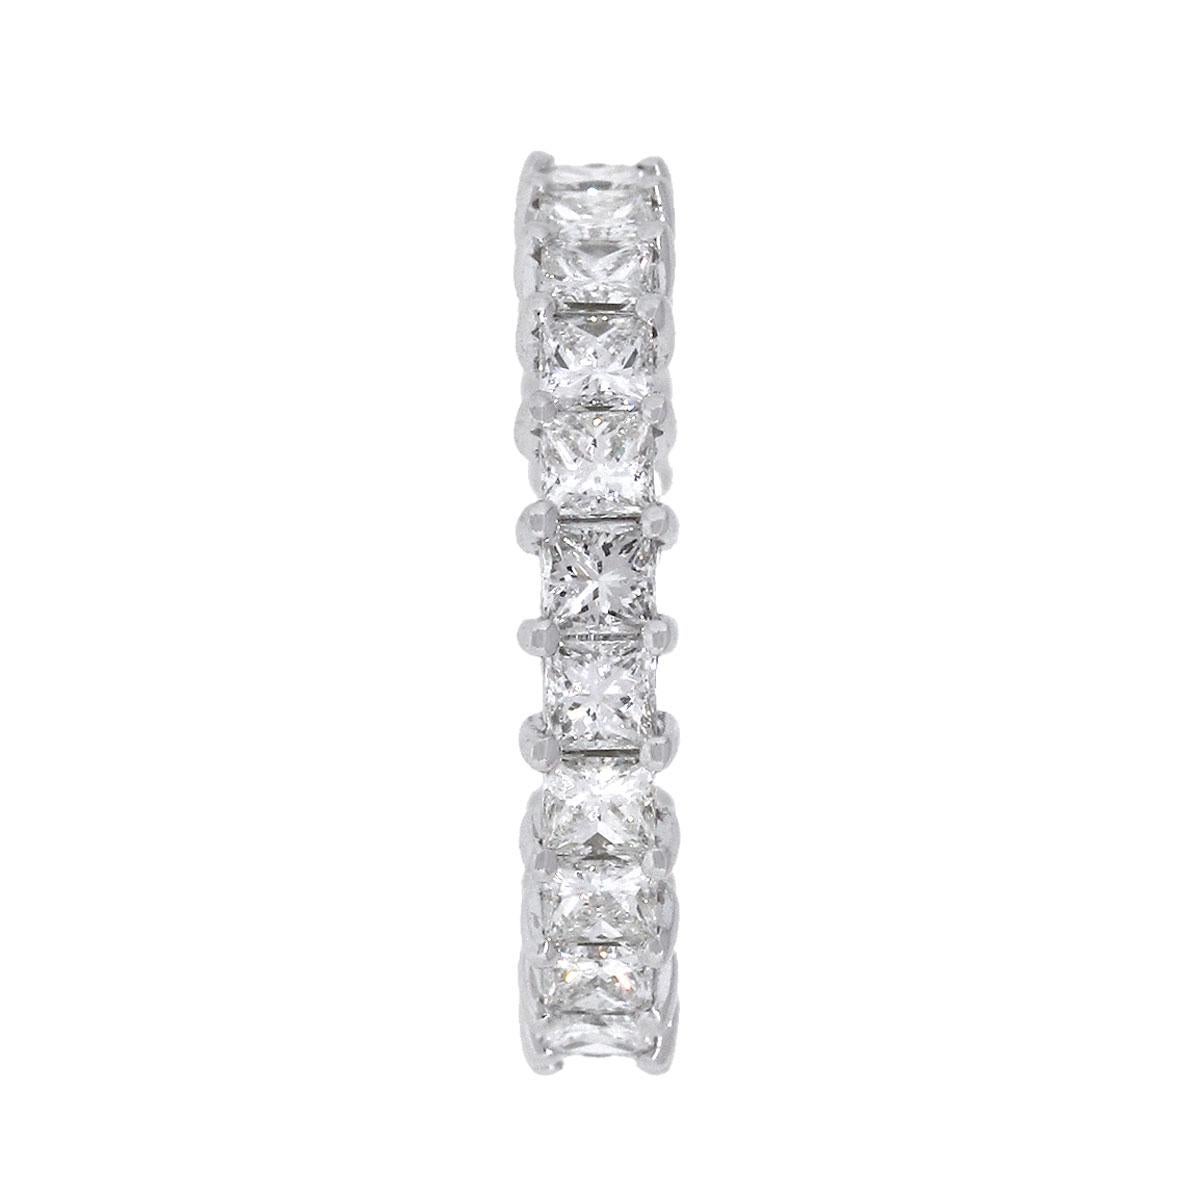 Material: 14k White Gold
Diamond Details: 21 stones, Approximately 1.92ctw of princess cut diamonds. Diamonds are G/H in color and VS in clarity
Size: 5.50
Total Weight: 1.9g (1.2dwt)
Measurements: 0.79″ x 0.10″ x 0.75″
SKU: A30312008